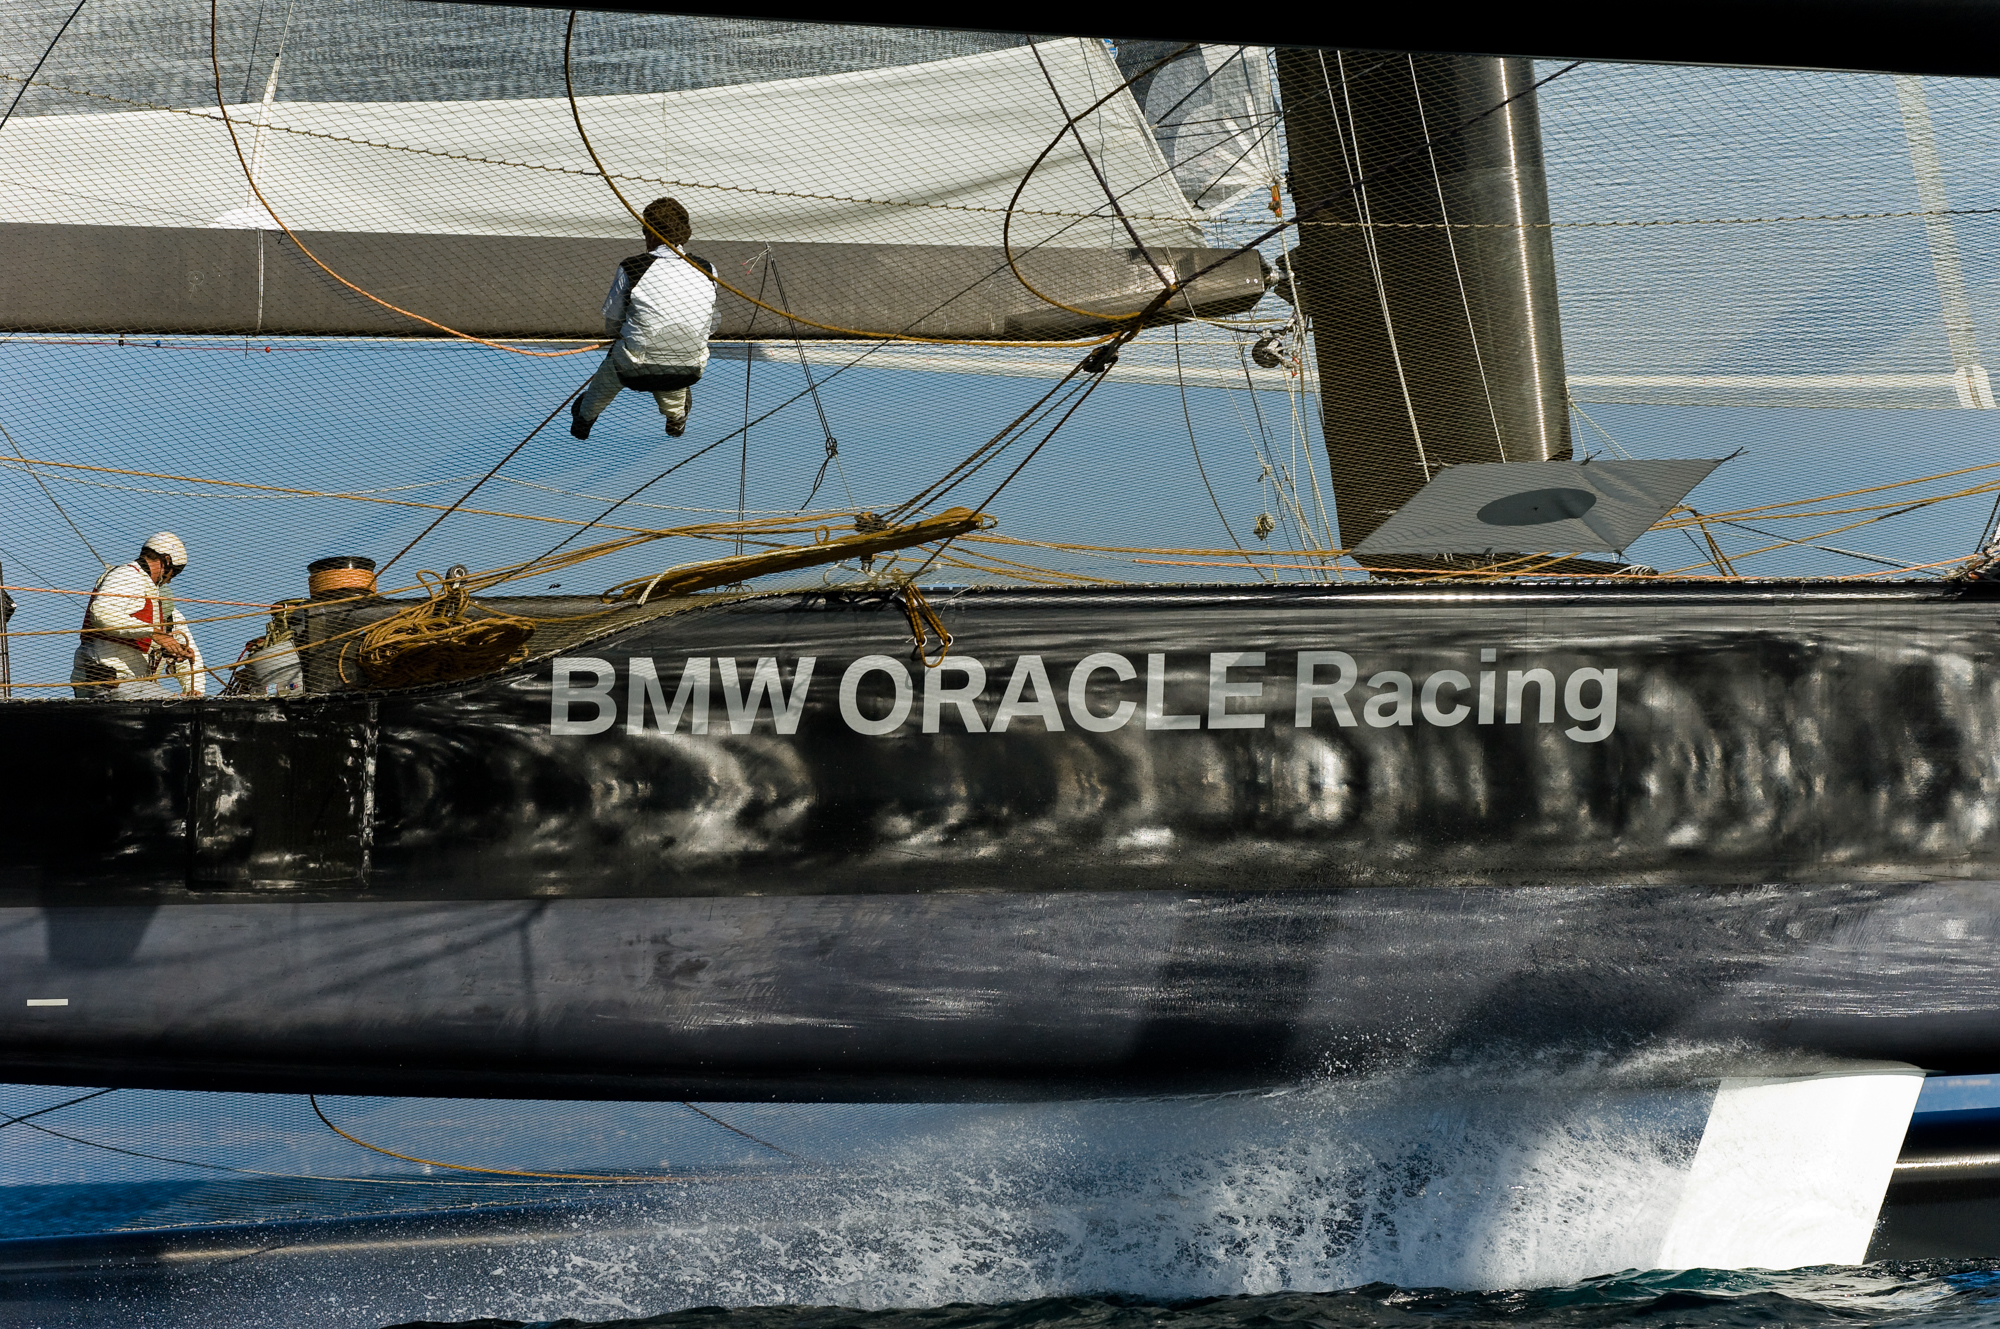 Client: BMW Oracle Racing